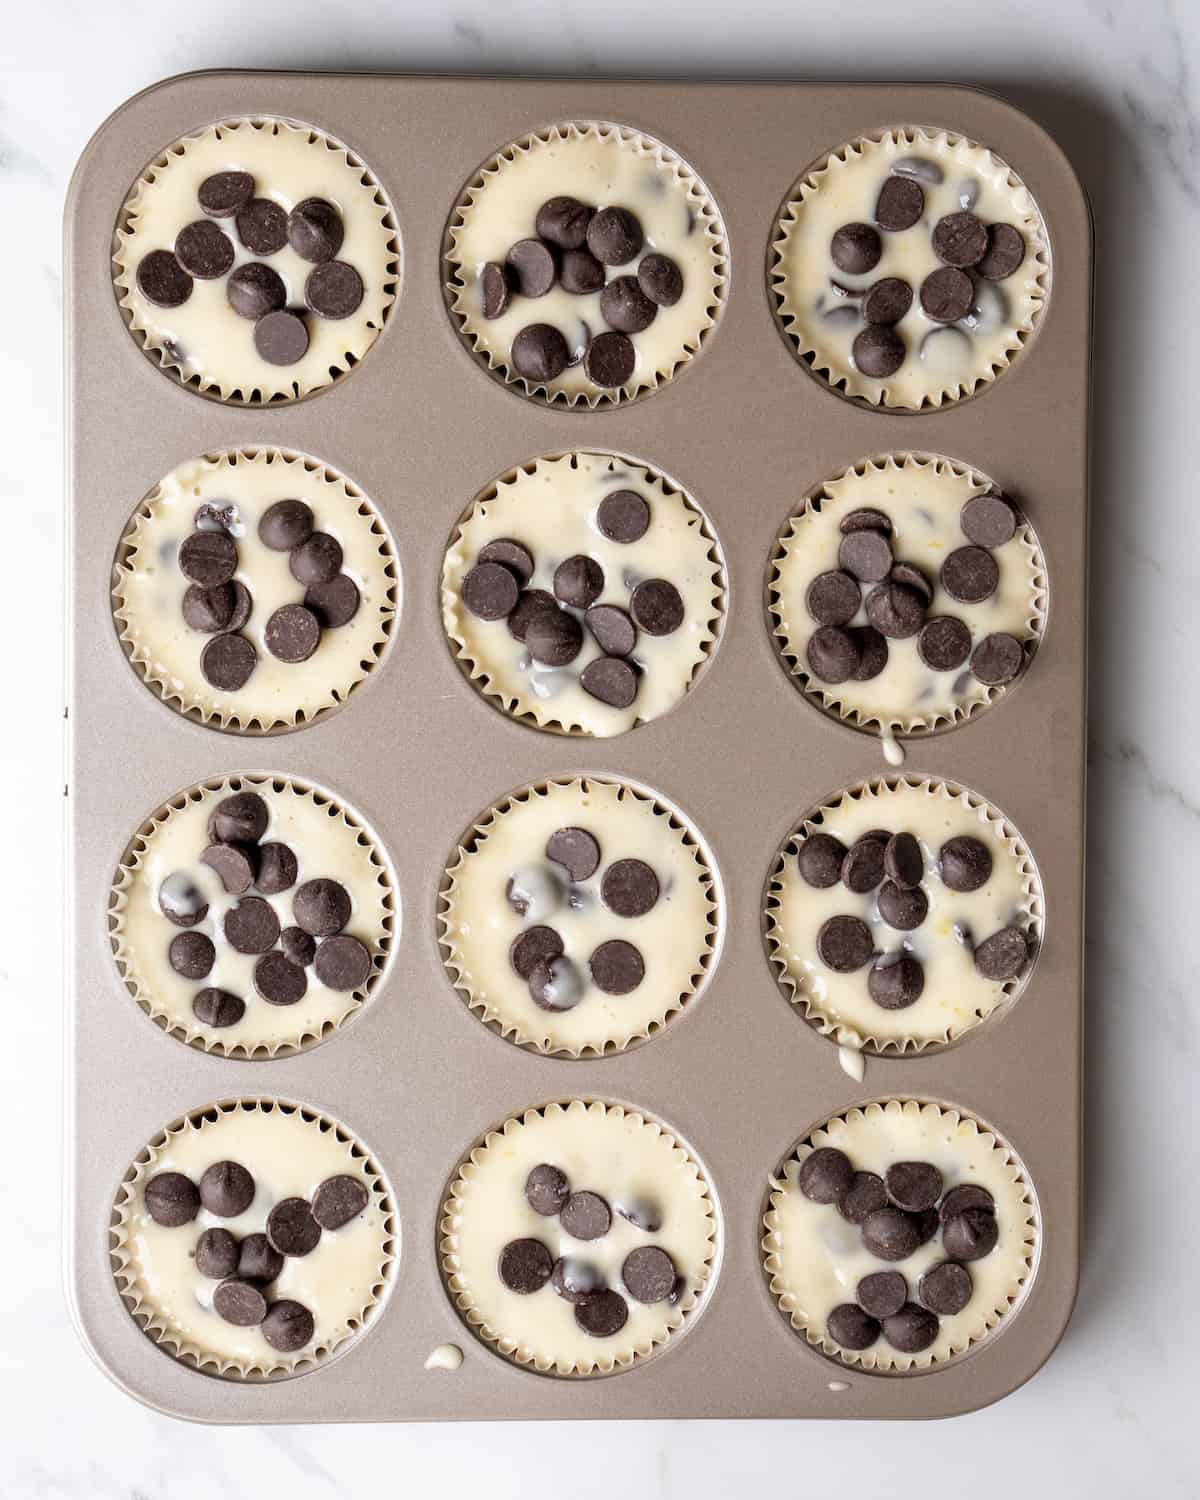 A 3x4 muffin tin has been filled with the mixture and chocolate chips.  